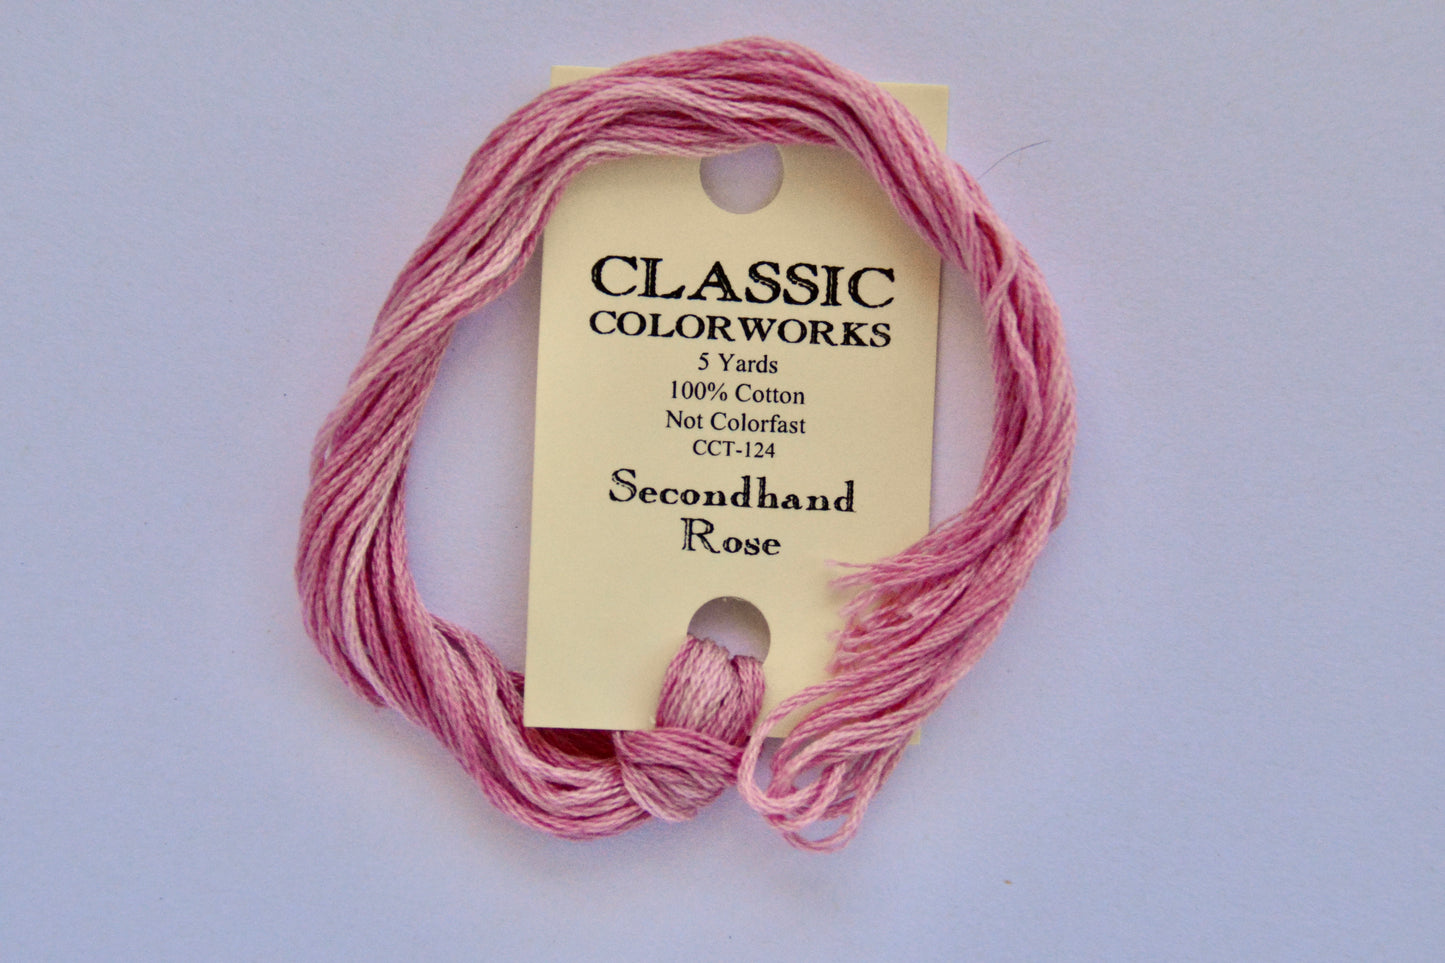 Secondhand Rose Classic Colorworks 6-Strand Hand-Dyed Embroidery Floss